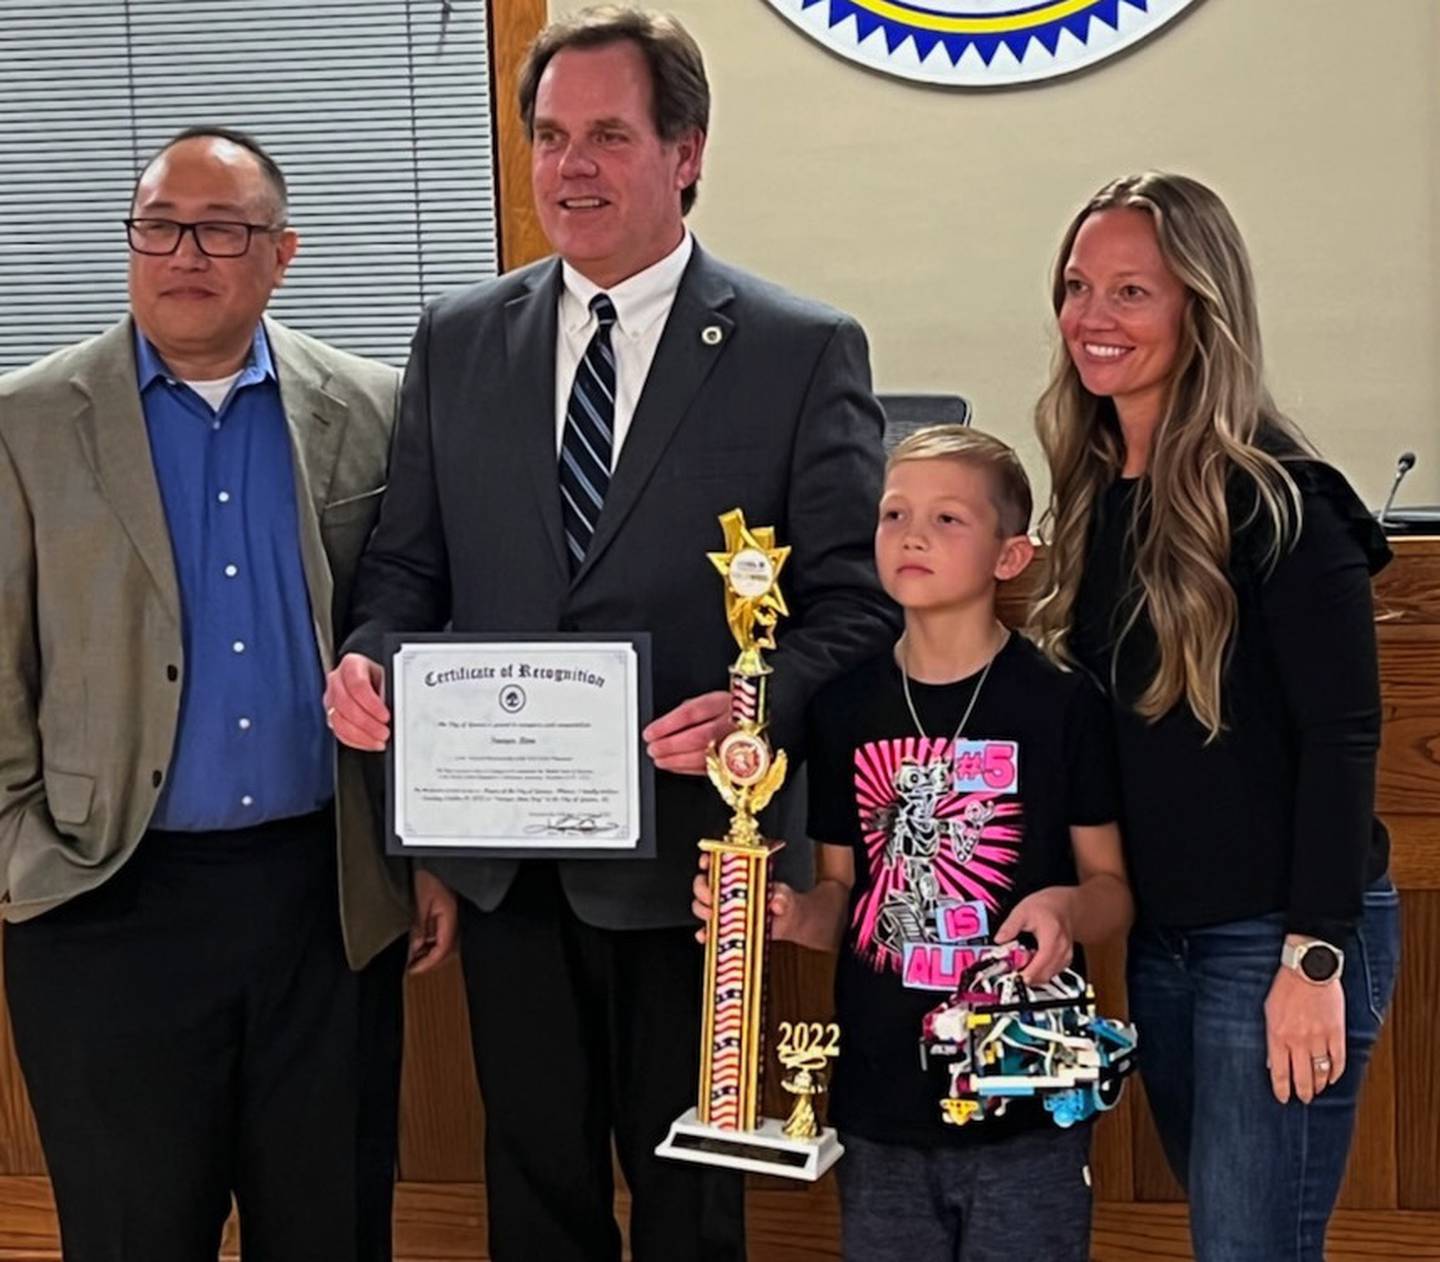 William Wong (left), Geneva Mayor Kevin Burns, Sawyer Rinn, Kristy Rinn at Geneva City Hall Monday where Sawyer was recognized for his first place trophy in the World Robot Olympiad. Wong is Sawyer’s coach in robotics.